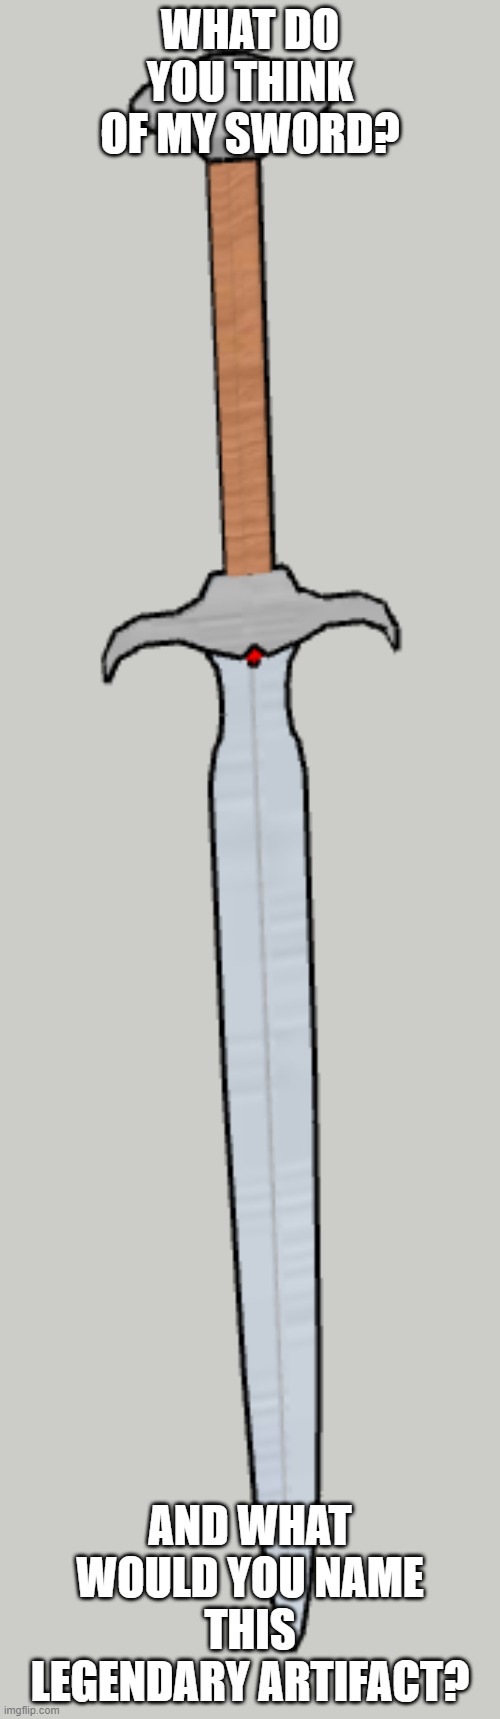 need some ideas for a name | WHAT DO YOU THINK OF MY SWORD? AND WHAT WOULD YOU NAME THIS LEGENDARY ARTIFACT? | image tagged in sword,name | made w/ Imgflip meme maker